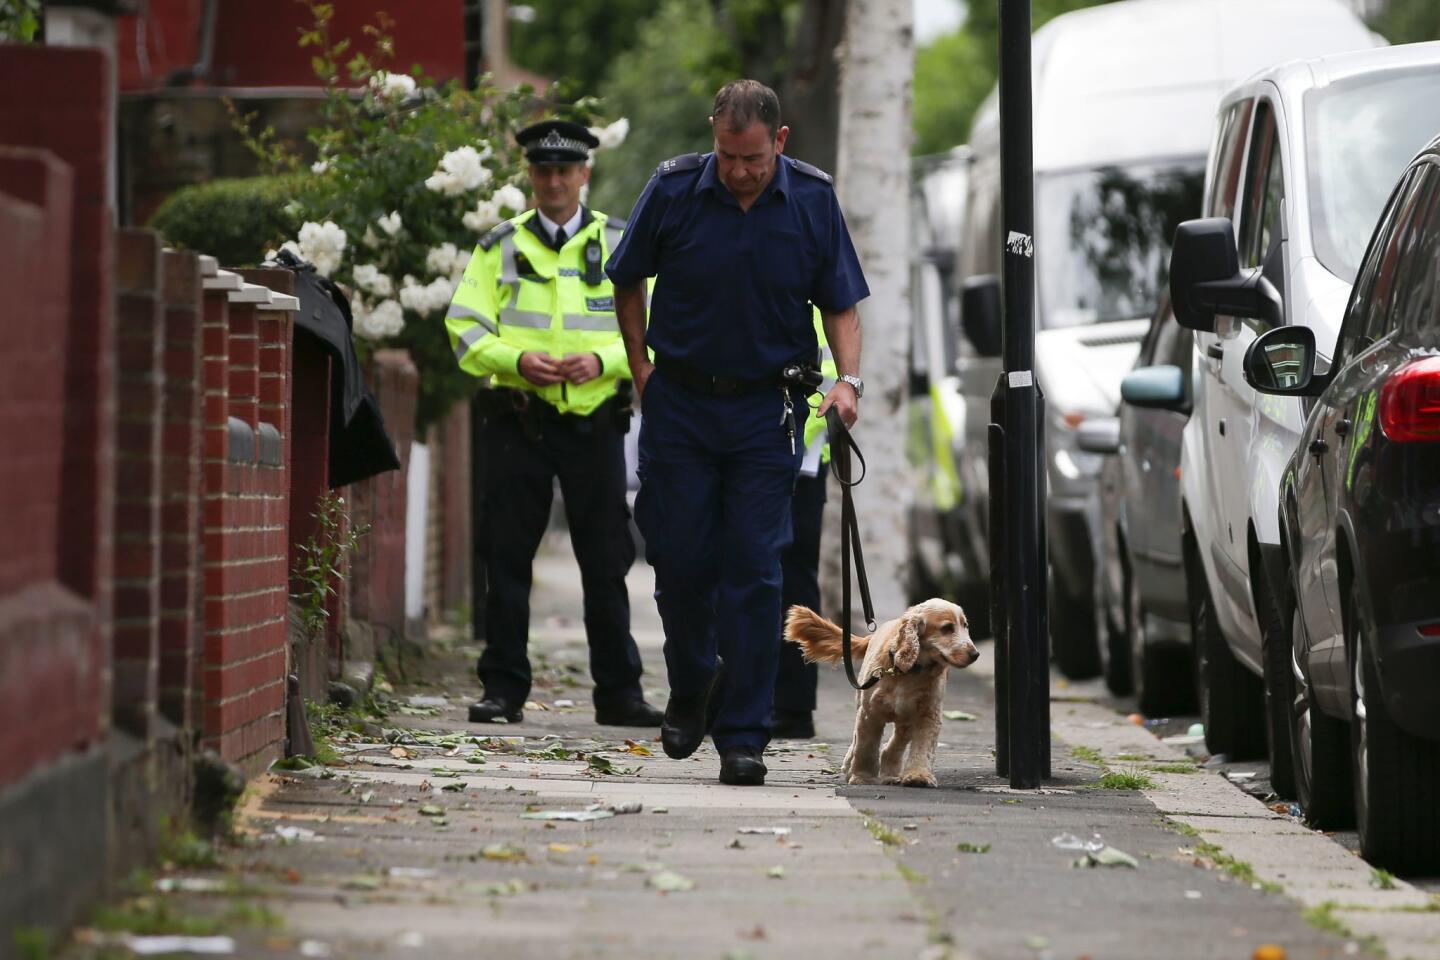 A police dog handler arrives to work during an attacks-related investigation at a residential property in east London on June 5.